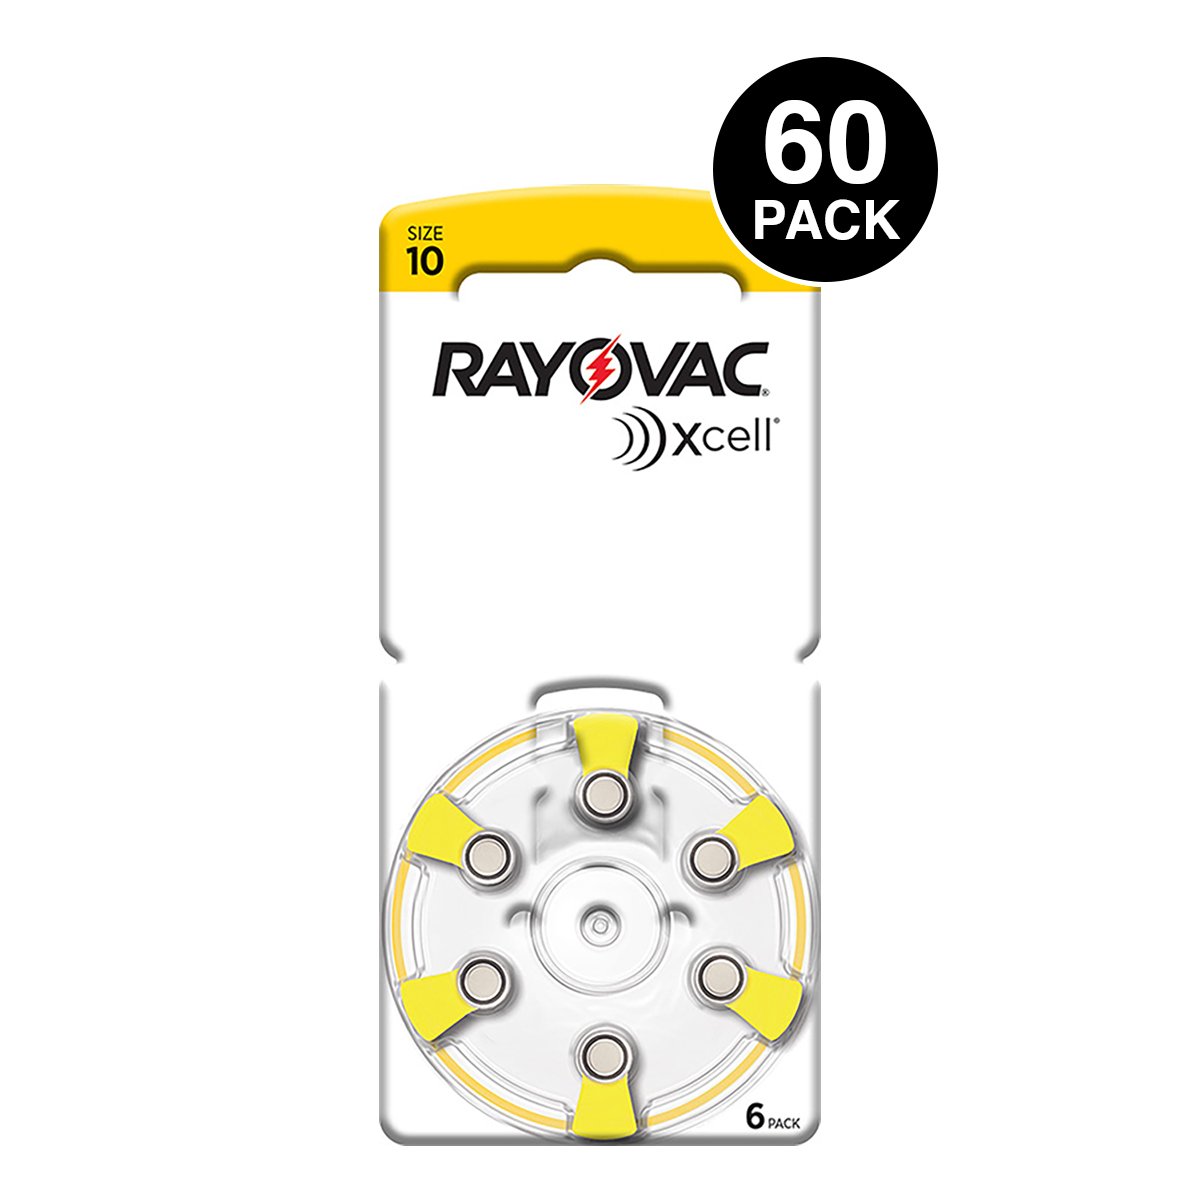 Xcell (Made By Rayovac) Size 10 Hearing Aid Batteries (60 pcs)